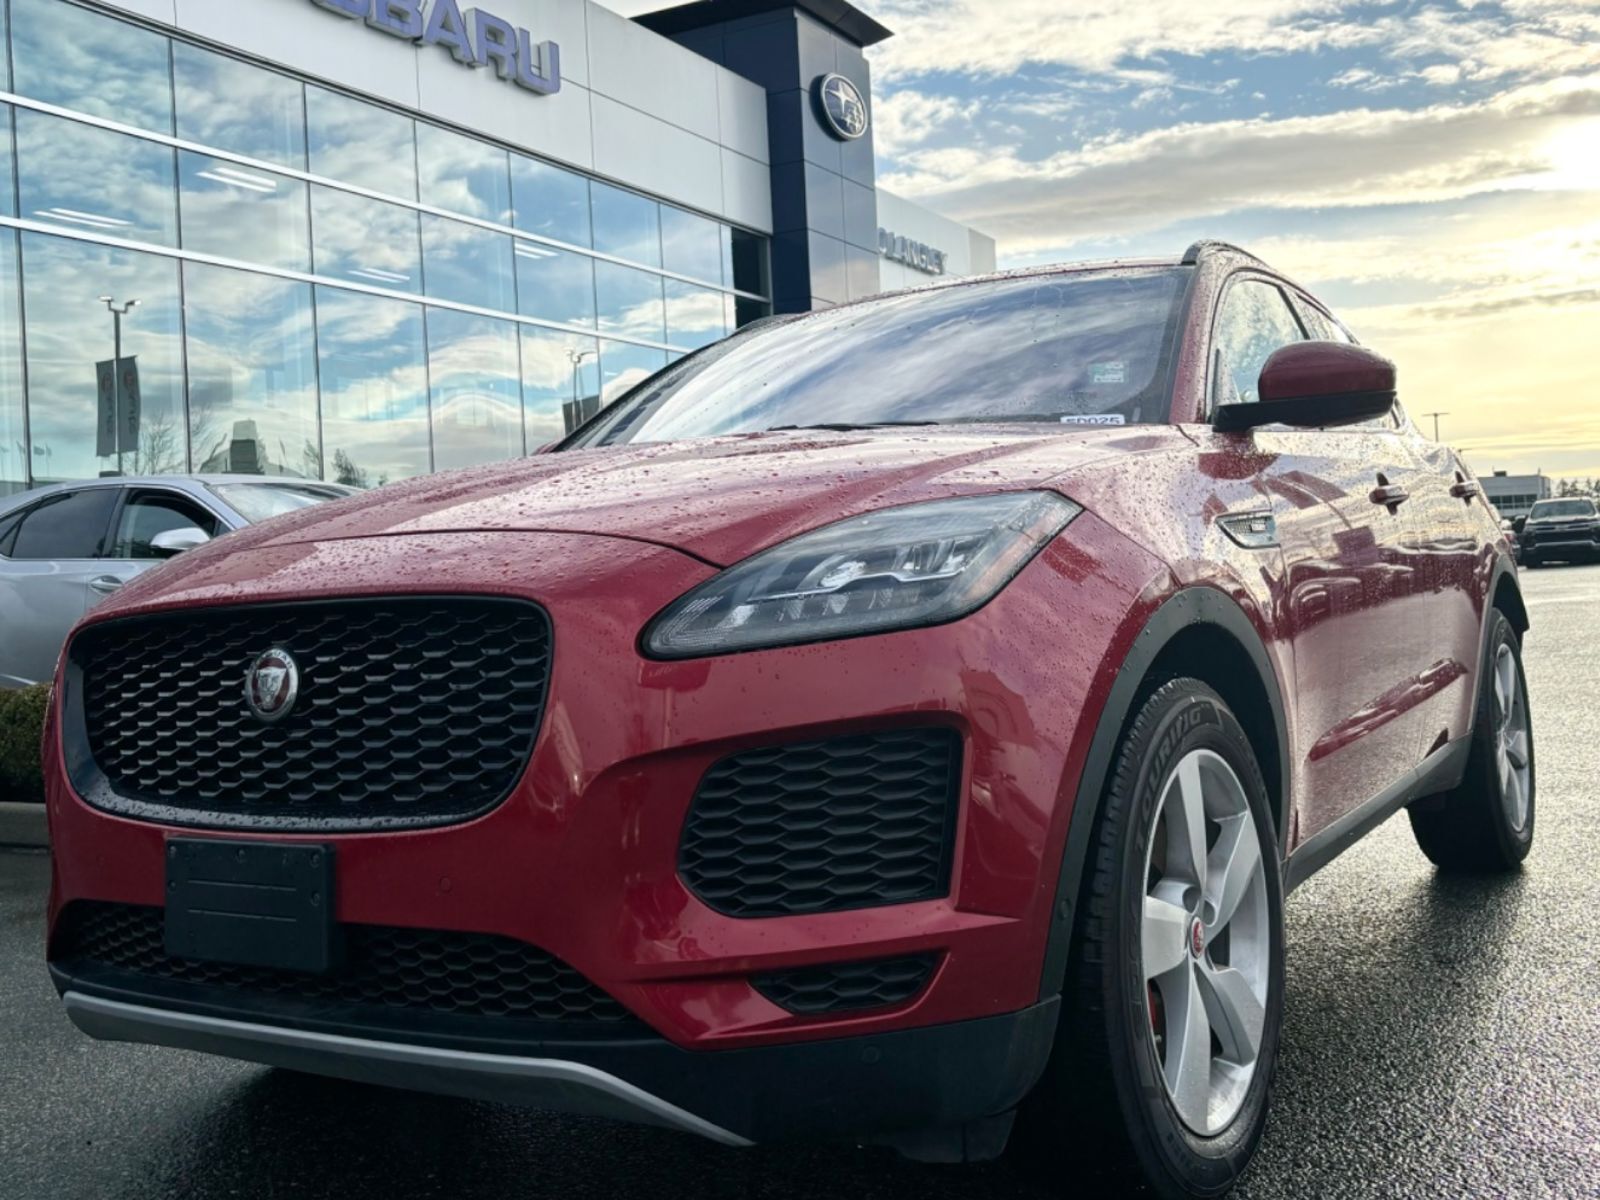 2018 Jaguar E-Pace CLEAN CARFAX | PUSH TO START | LEATHER SEATS | AWD